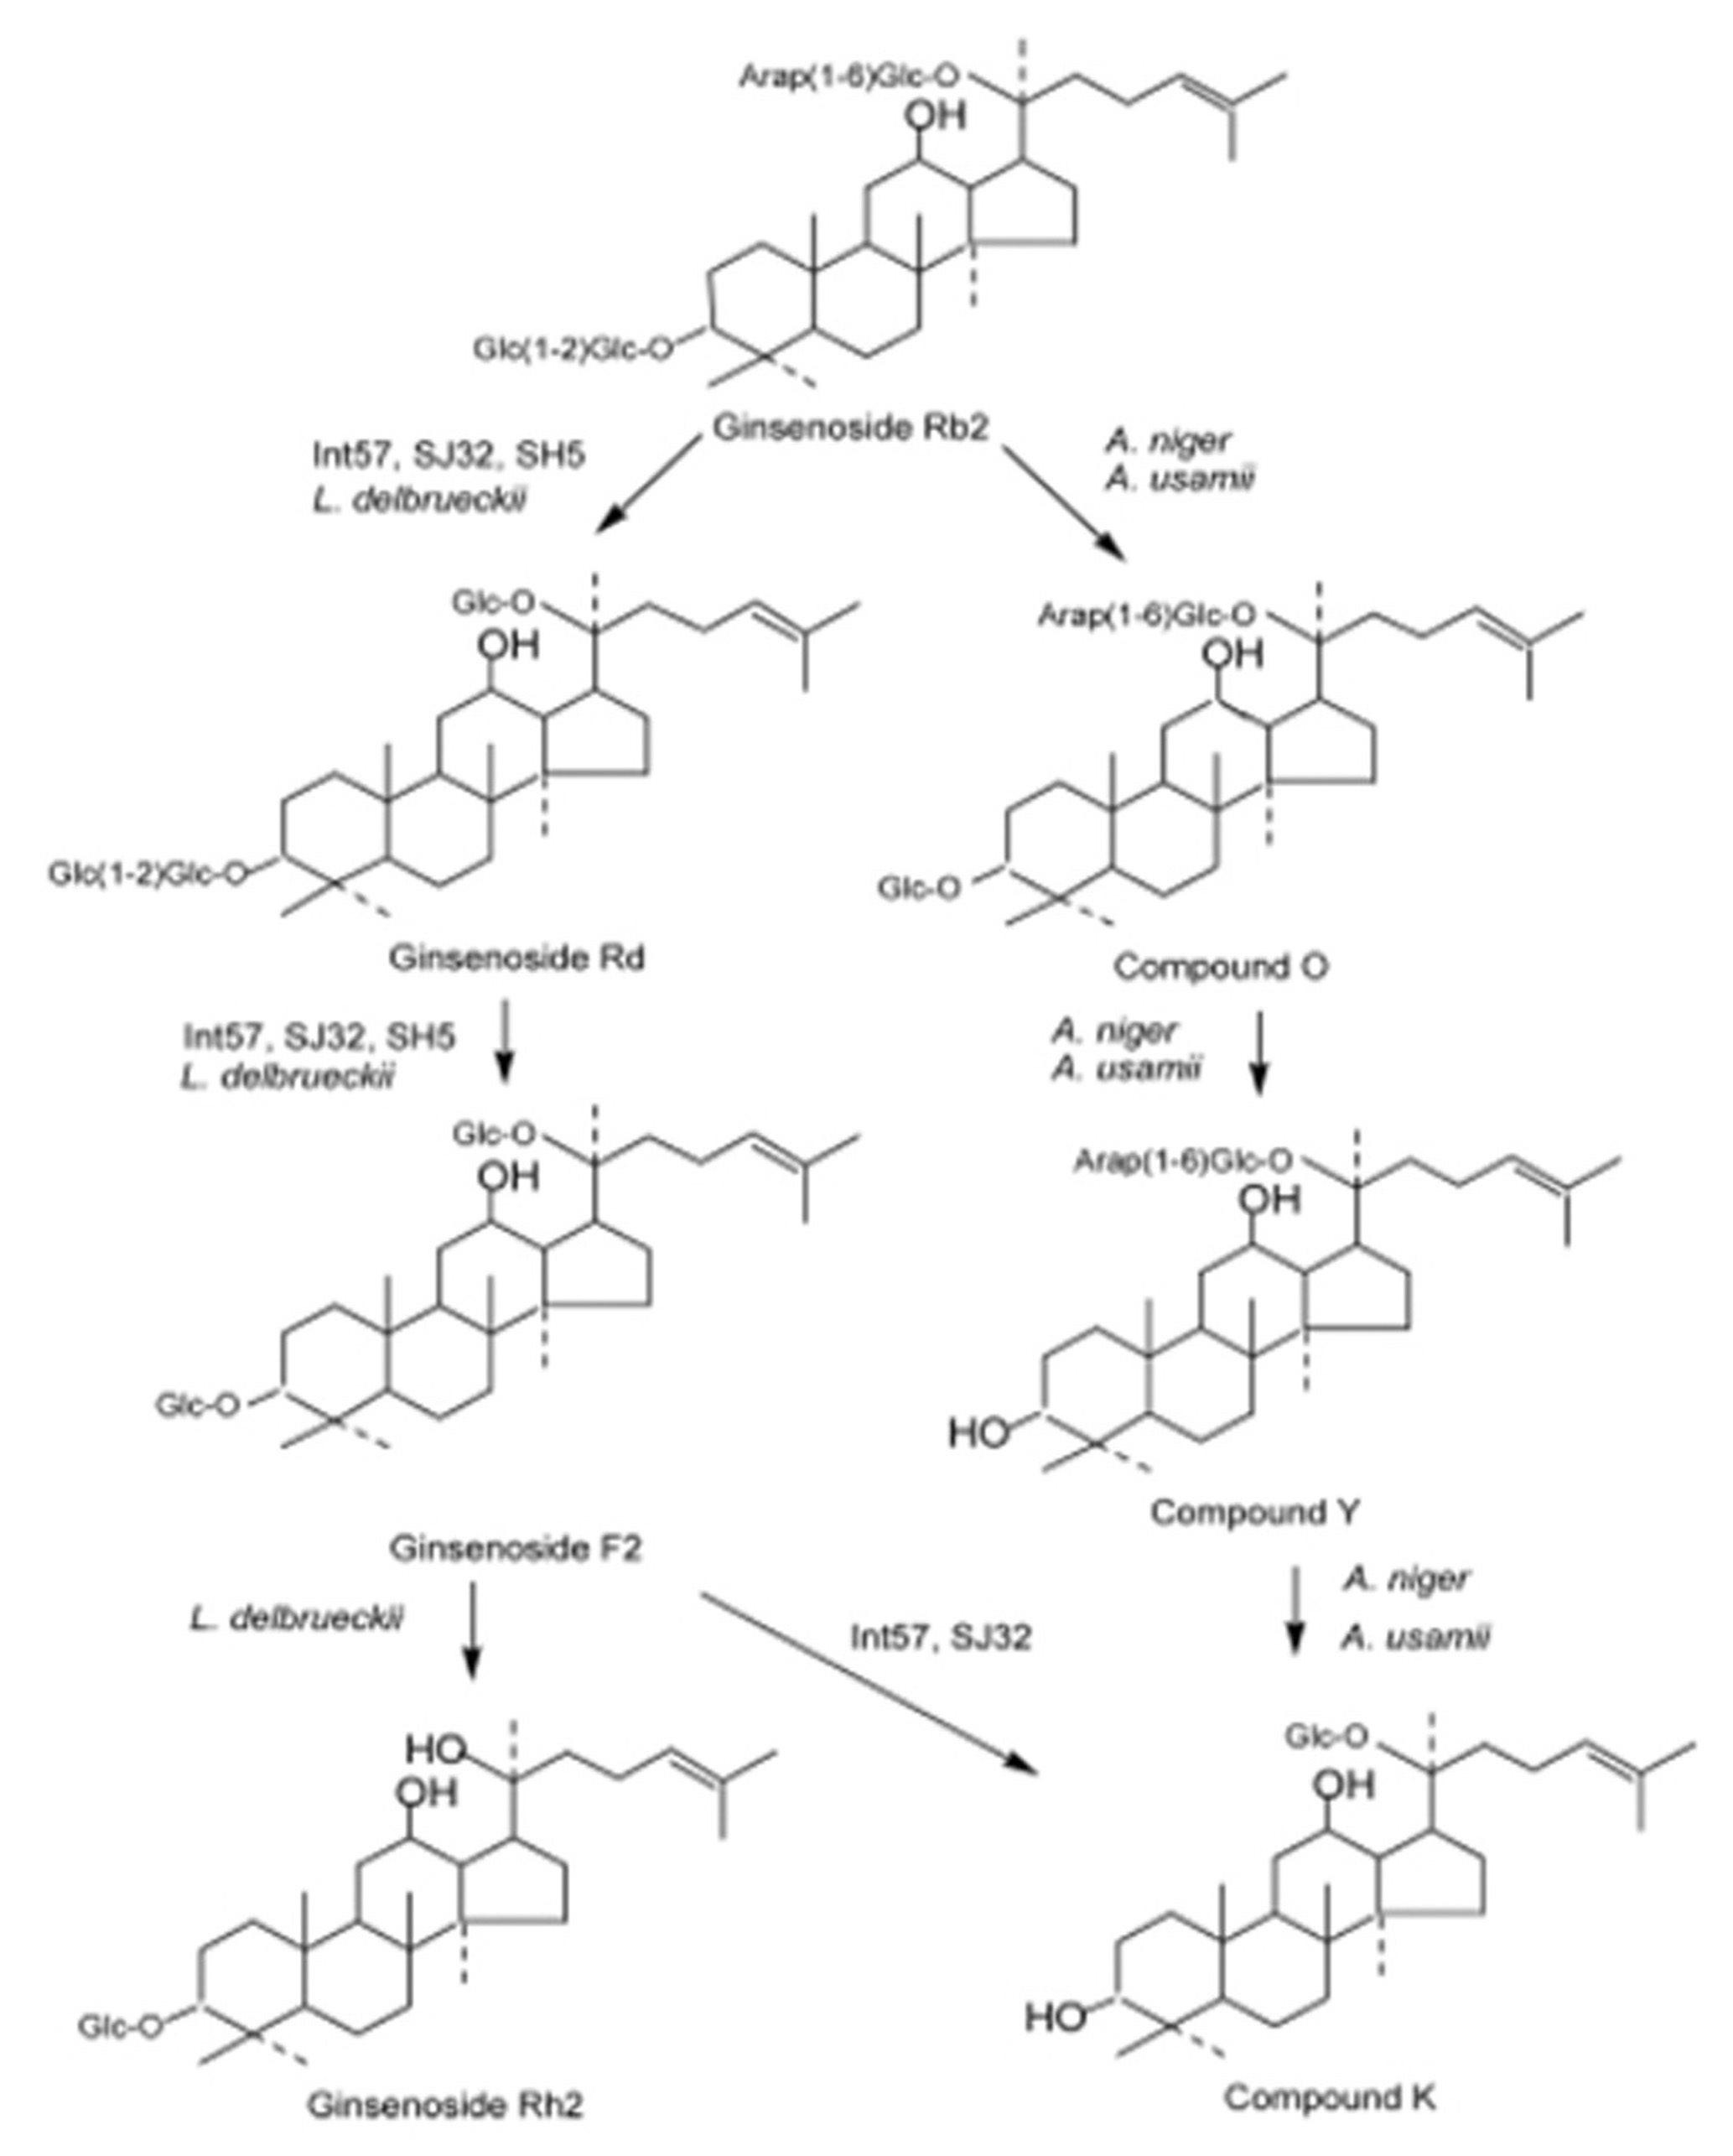 Proposed Transformation Pathways of Rb2 by Cell-Extracts from Various Food Microorganisms